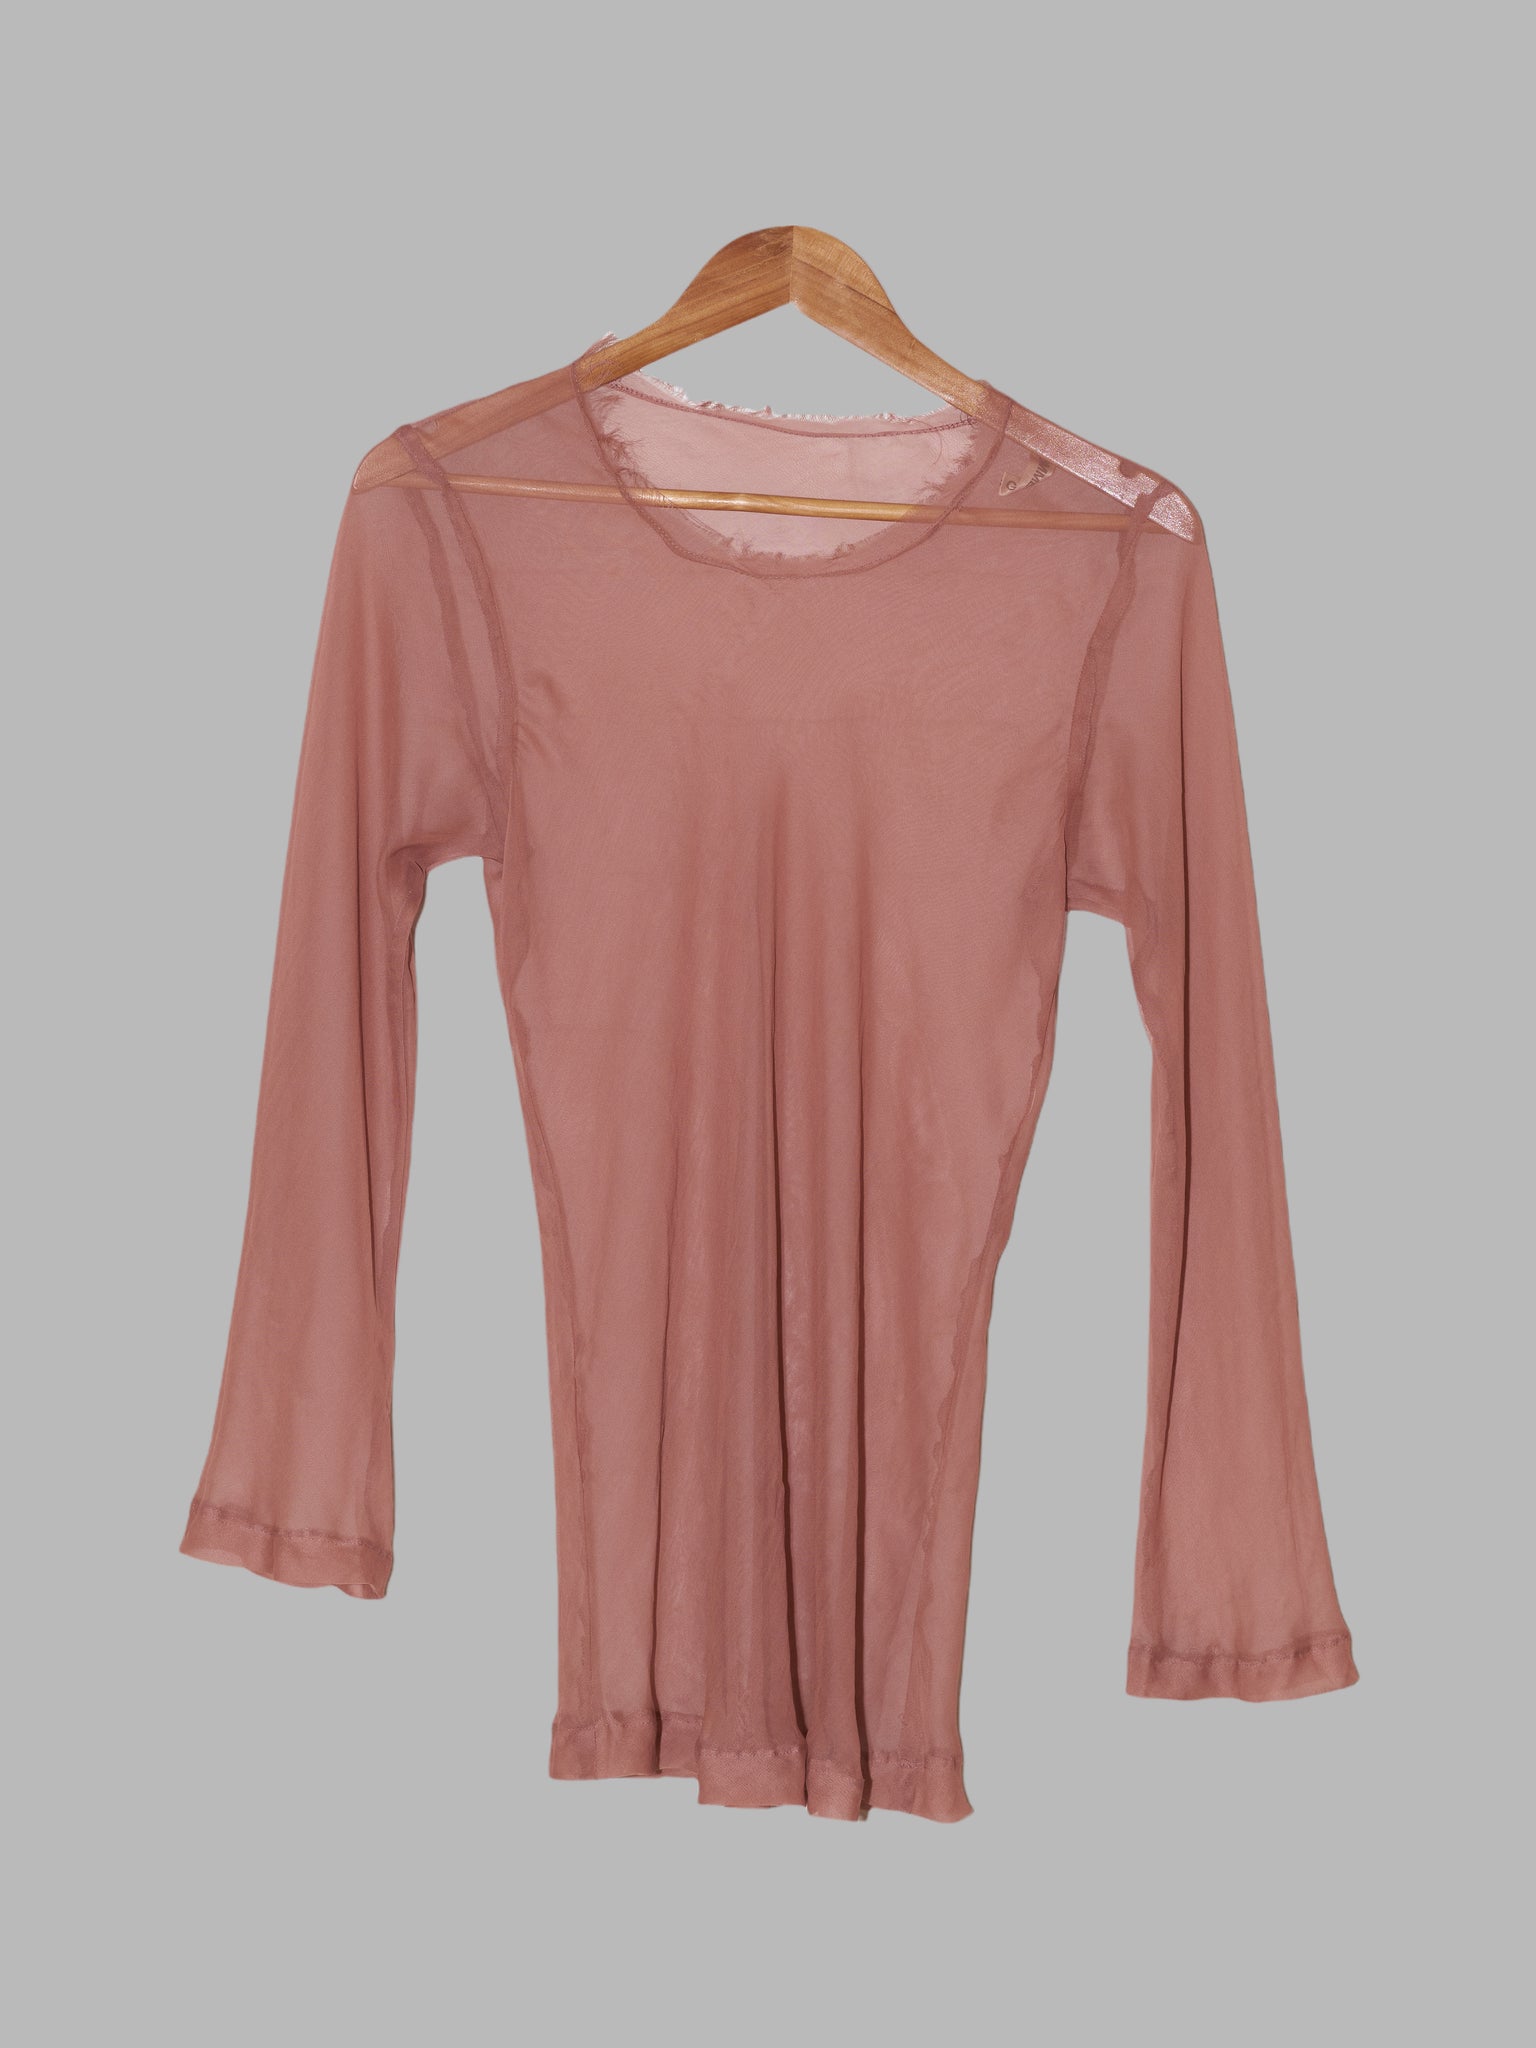 Comme des Garcons 1990s muted pink bias cut chiffon long sleeve top with frayed neckline